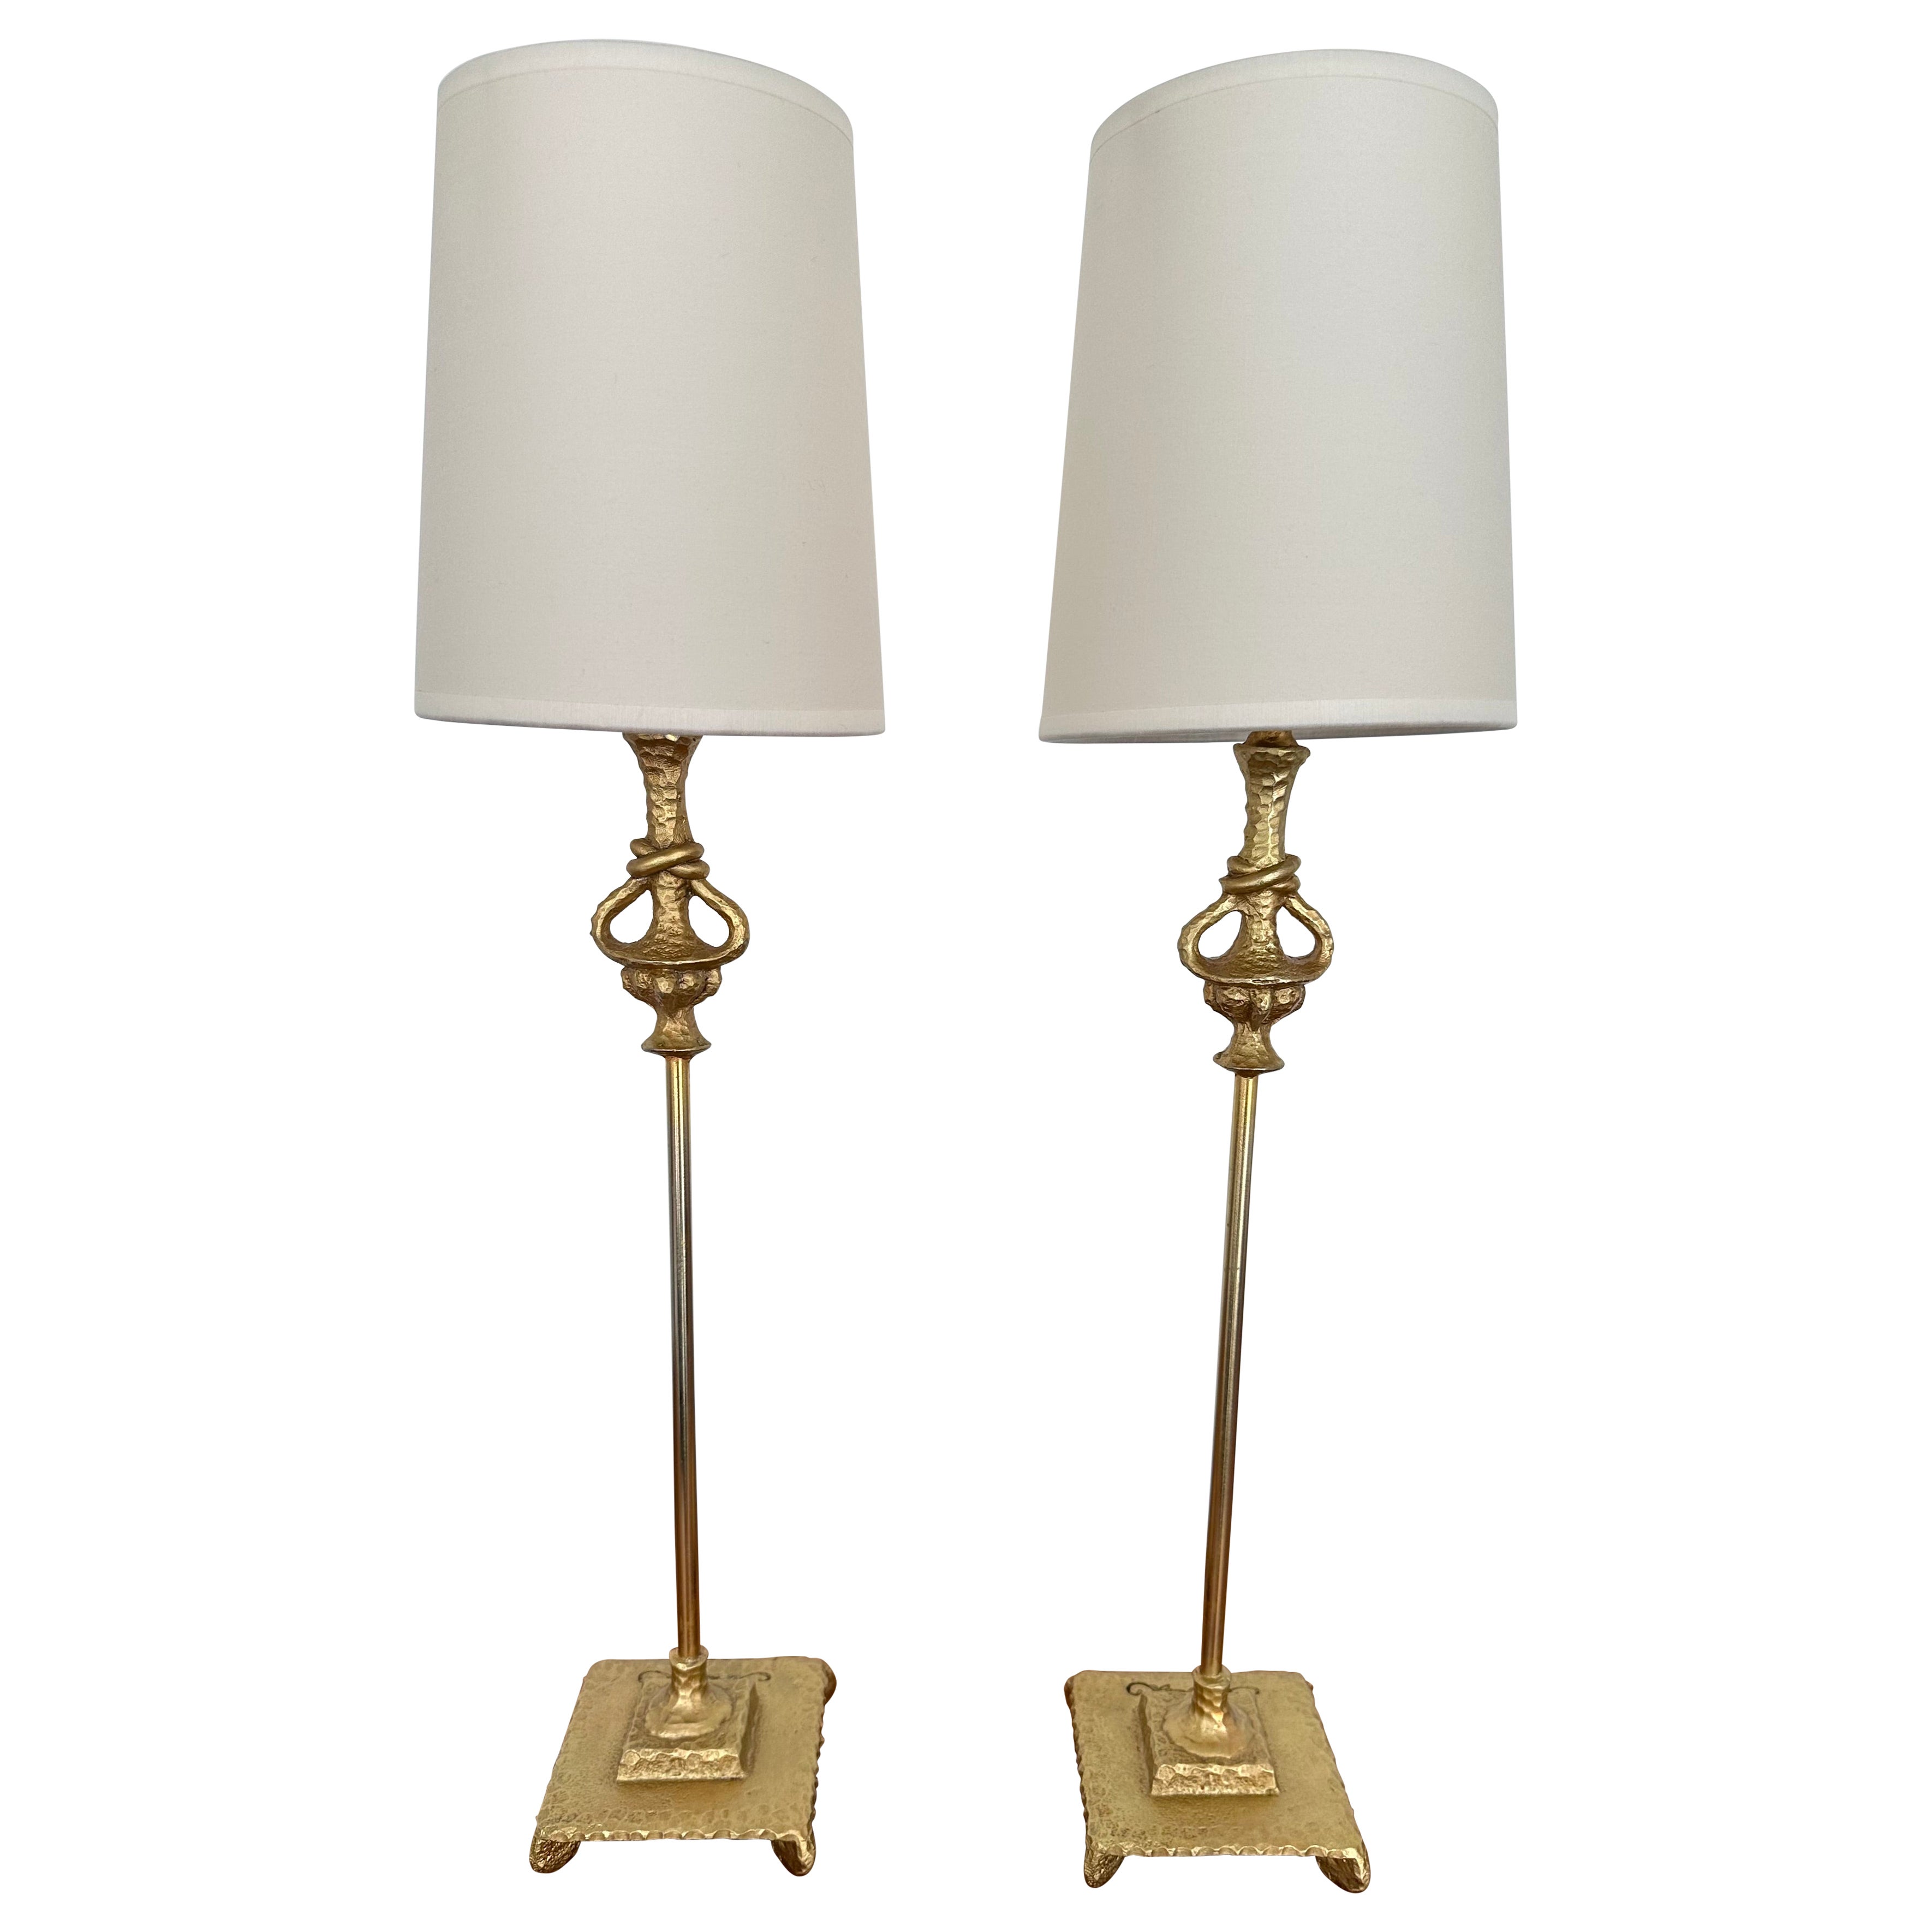 Pair of Lamps by Nicola Dewael for Fondica, France, 1990s